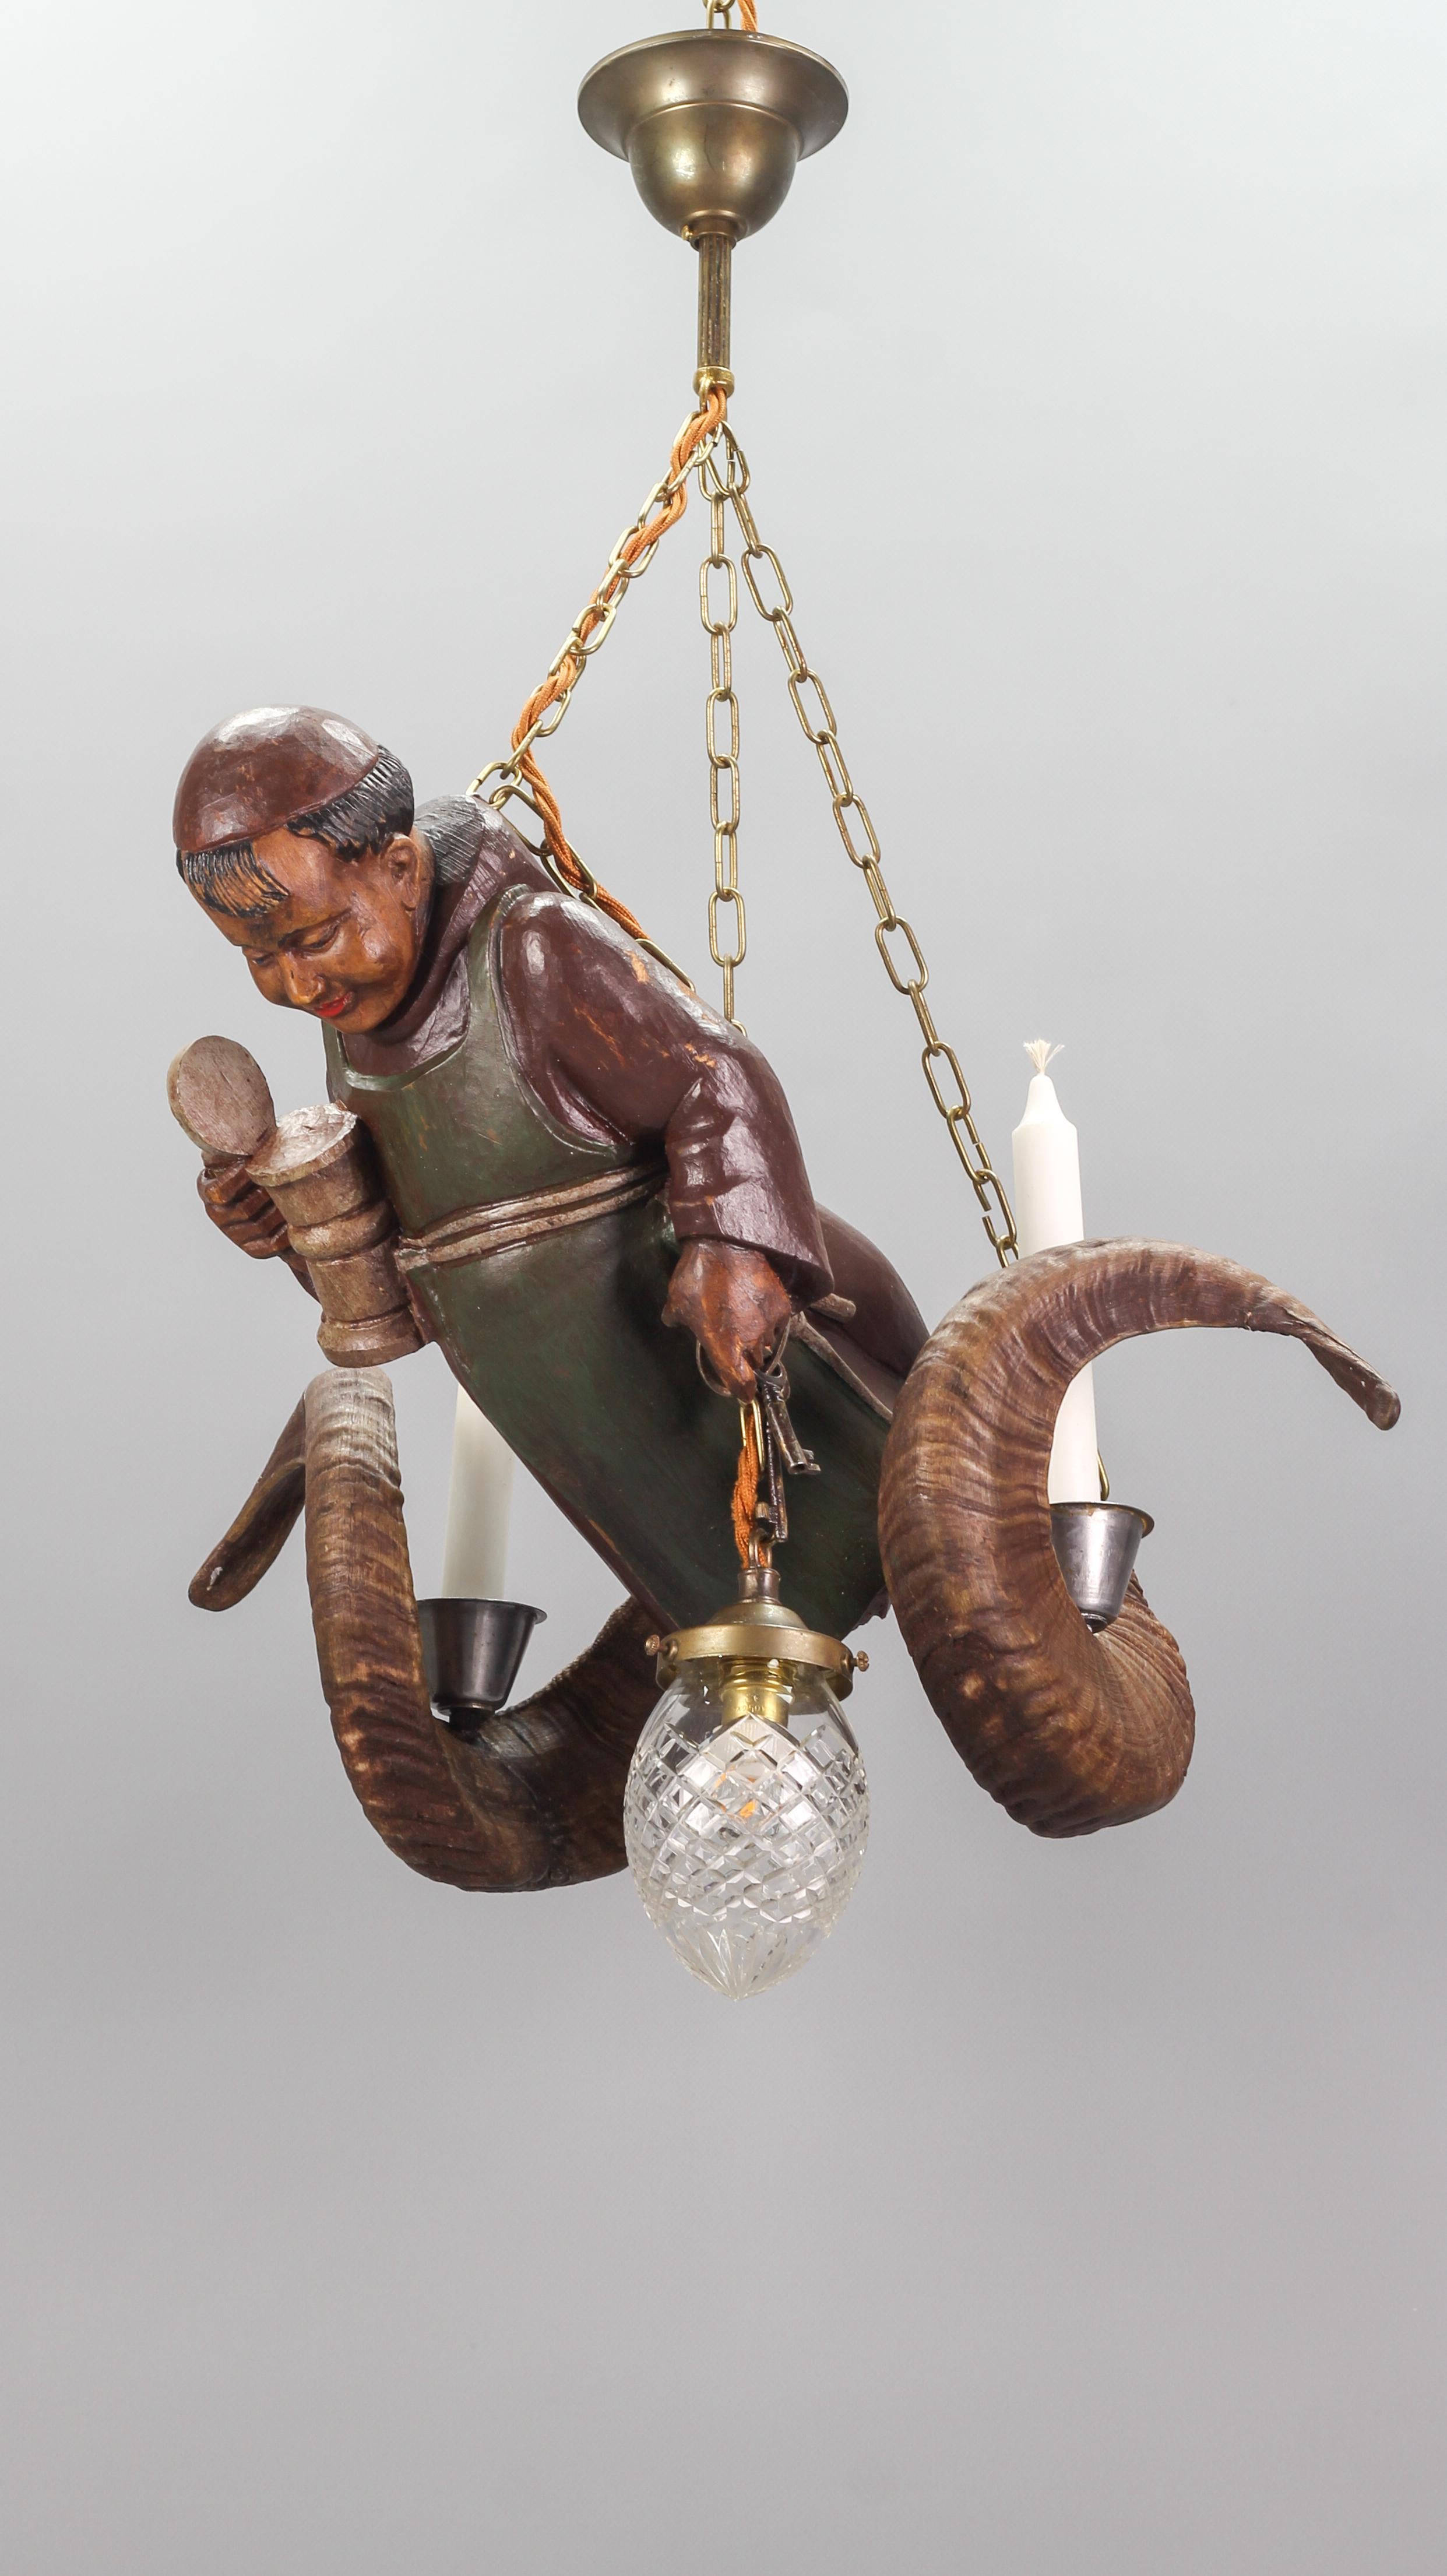 Metal Hand-Carved Wooden Pendant Light Lustermandl with Cellar Master Figure, ca. 1920